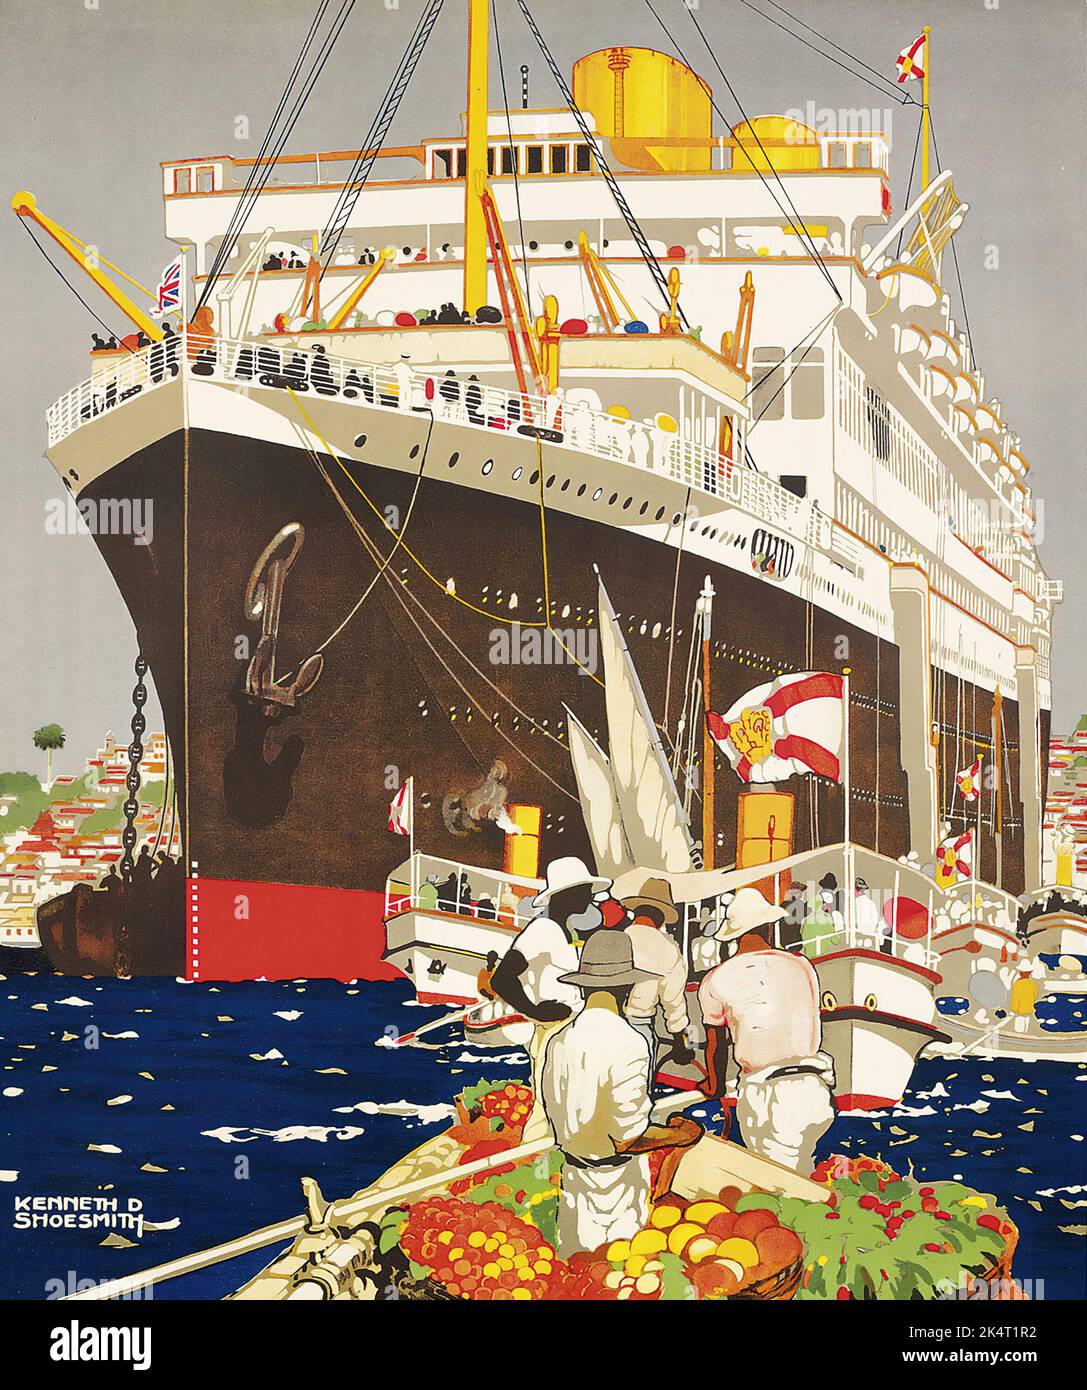 Wintager Travel Poster - Kenneth Denton Shoesmith (1890-1939) SÜDAMERIKA, THE ROYAL MAIL LINE (before Text) c 1930 Stockfoto